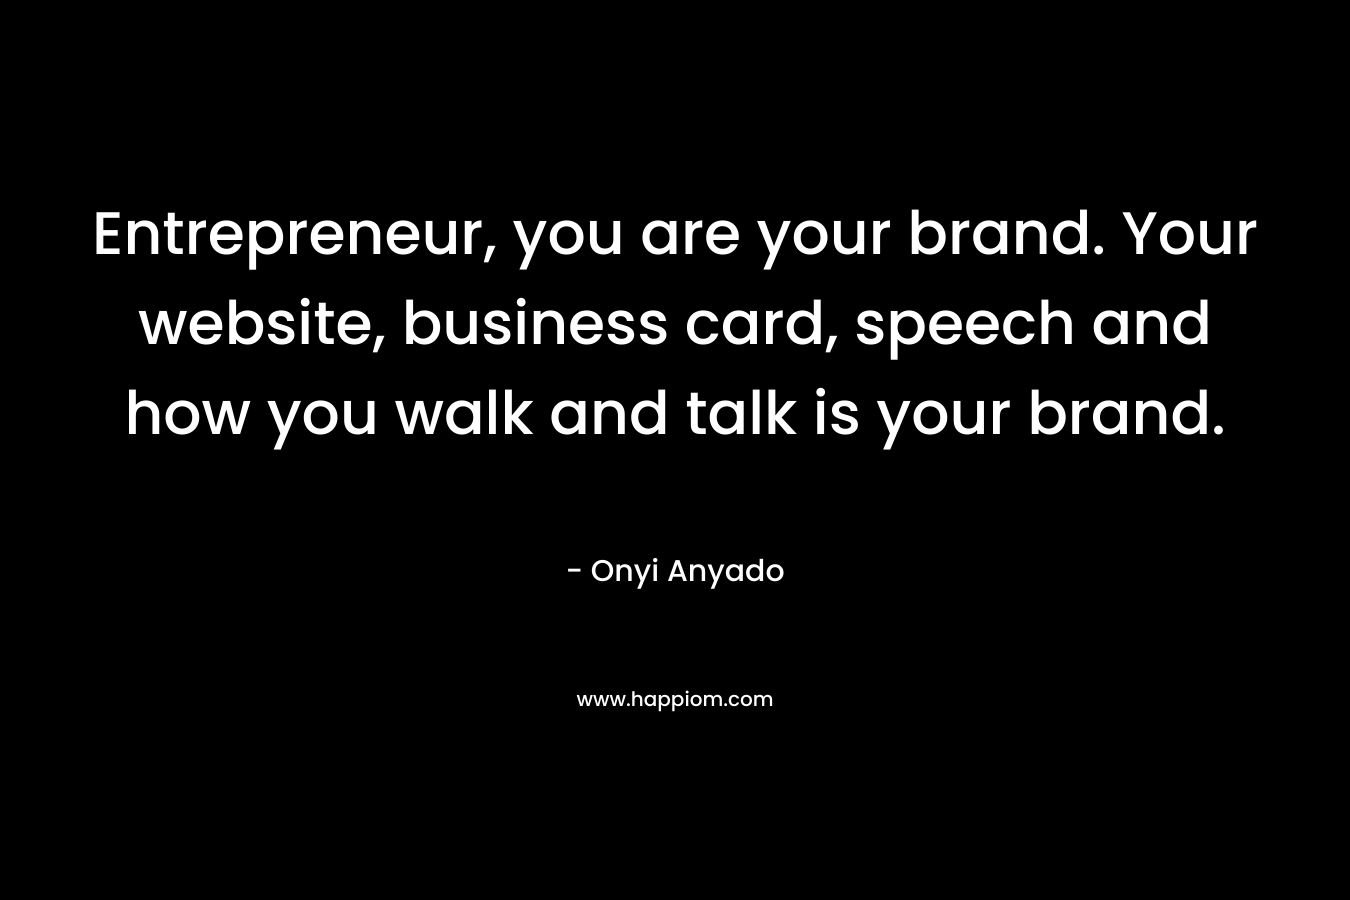 Entrepreneur, you are your brand. Your website, business card, speech and how you walk and talk is your brand. – Onyi Anyado